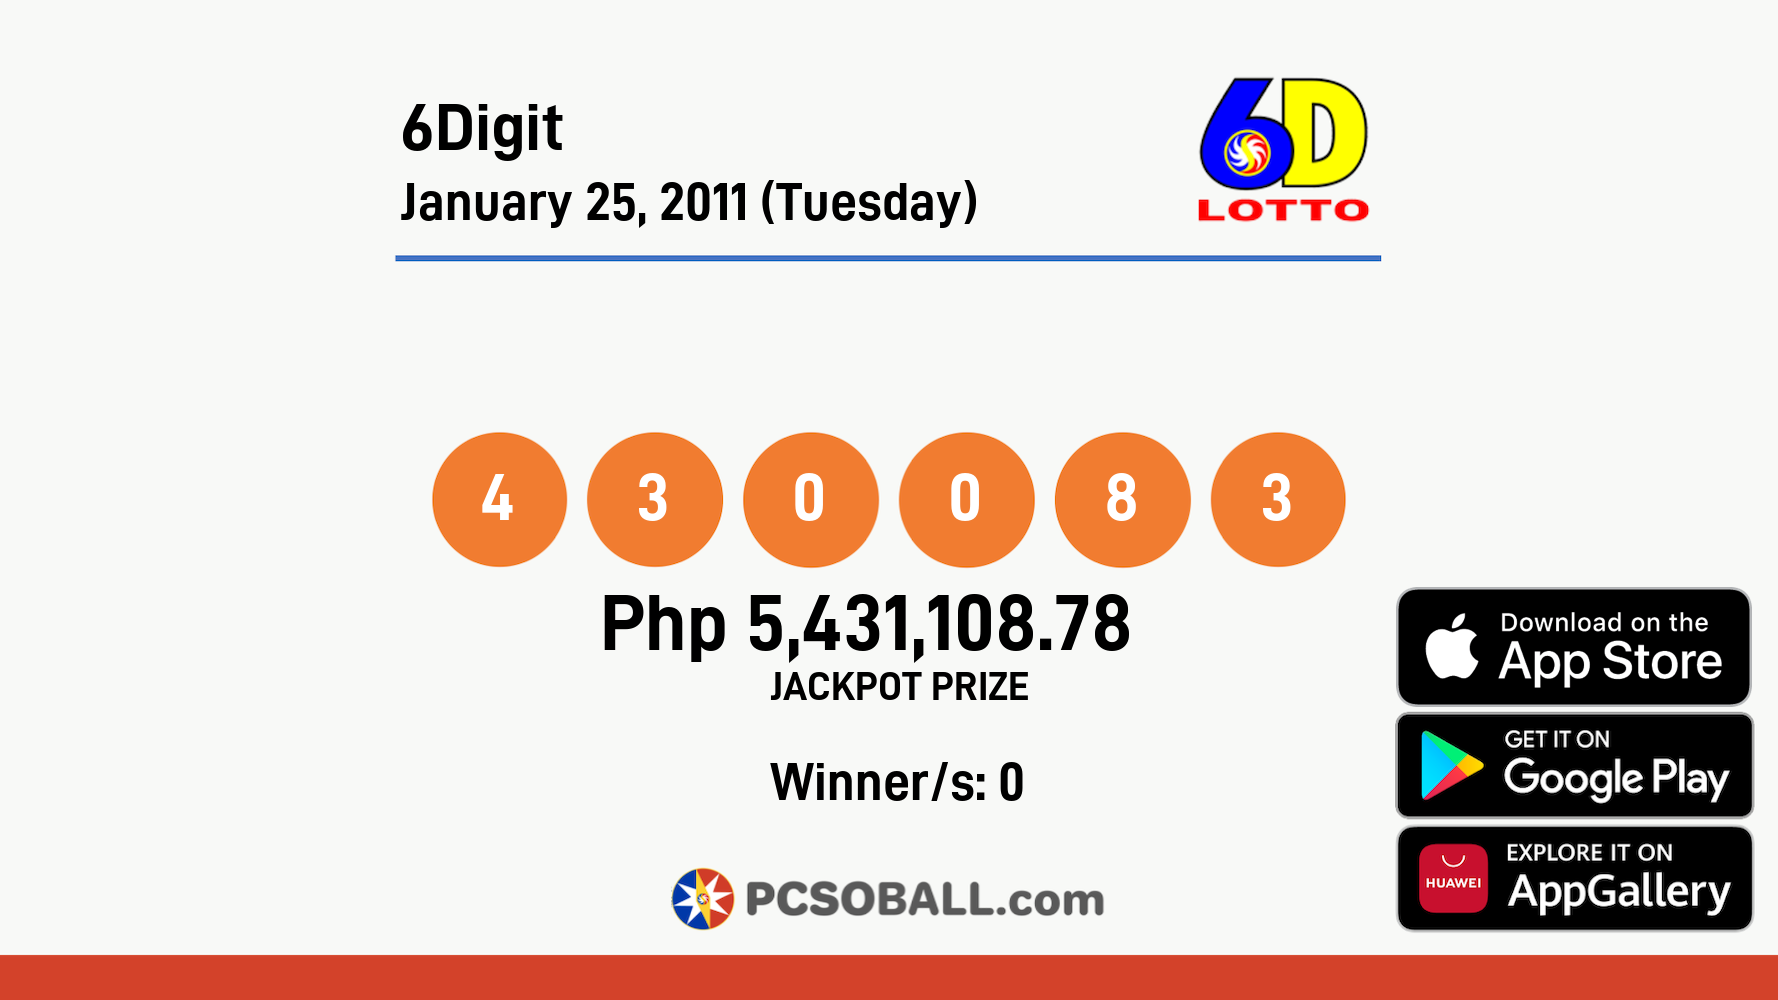 6Digit January 25, 2011 (Tuesday) Result